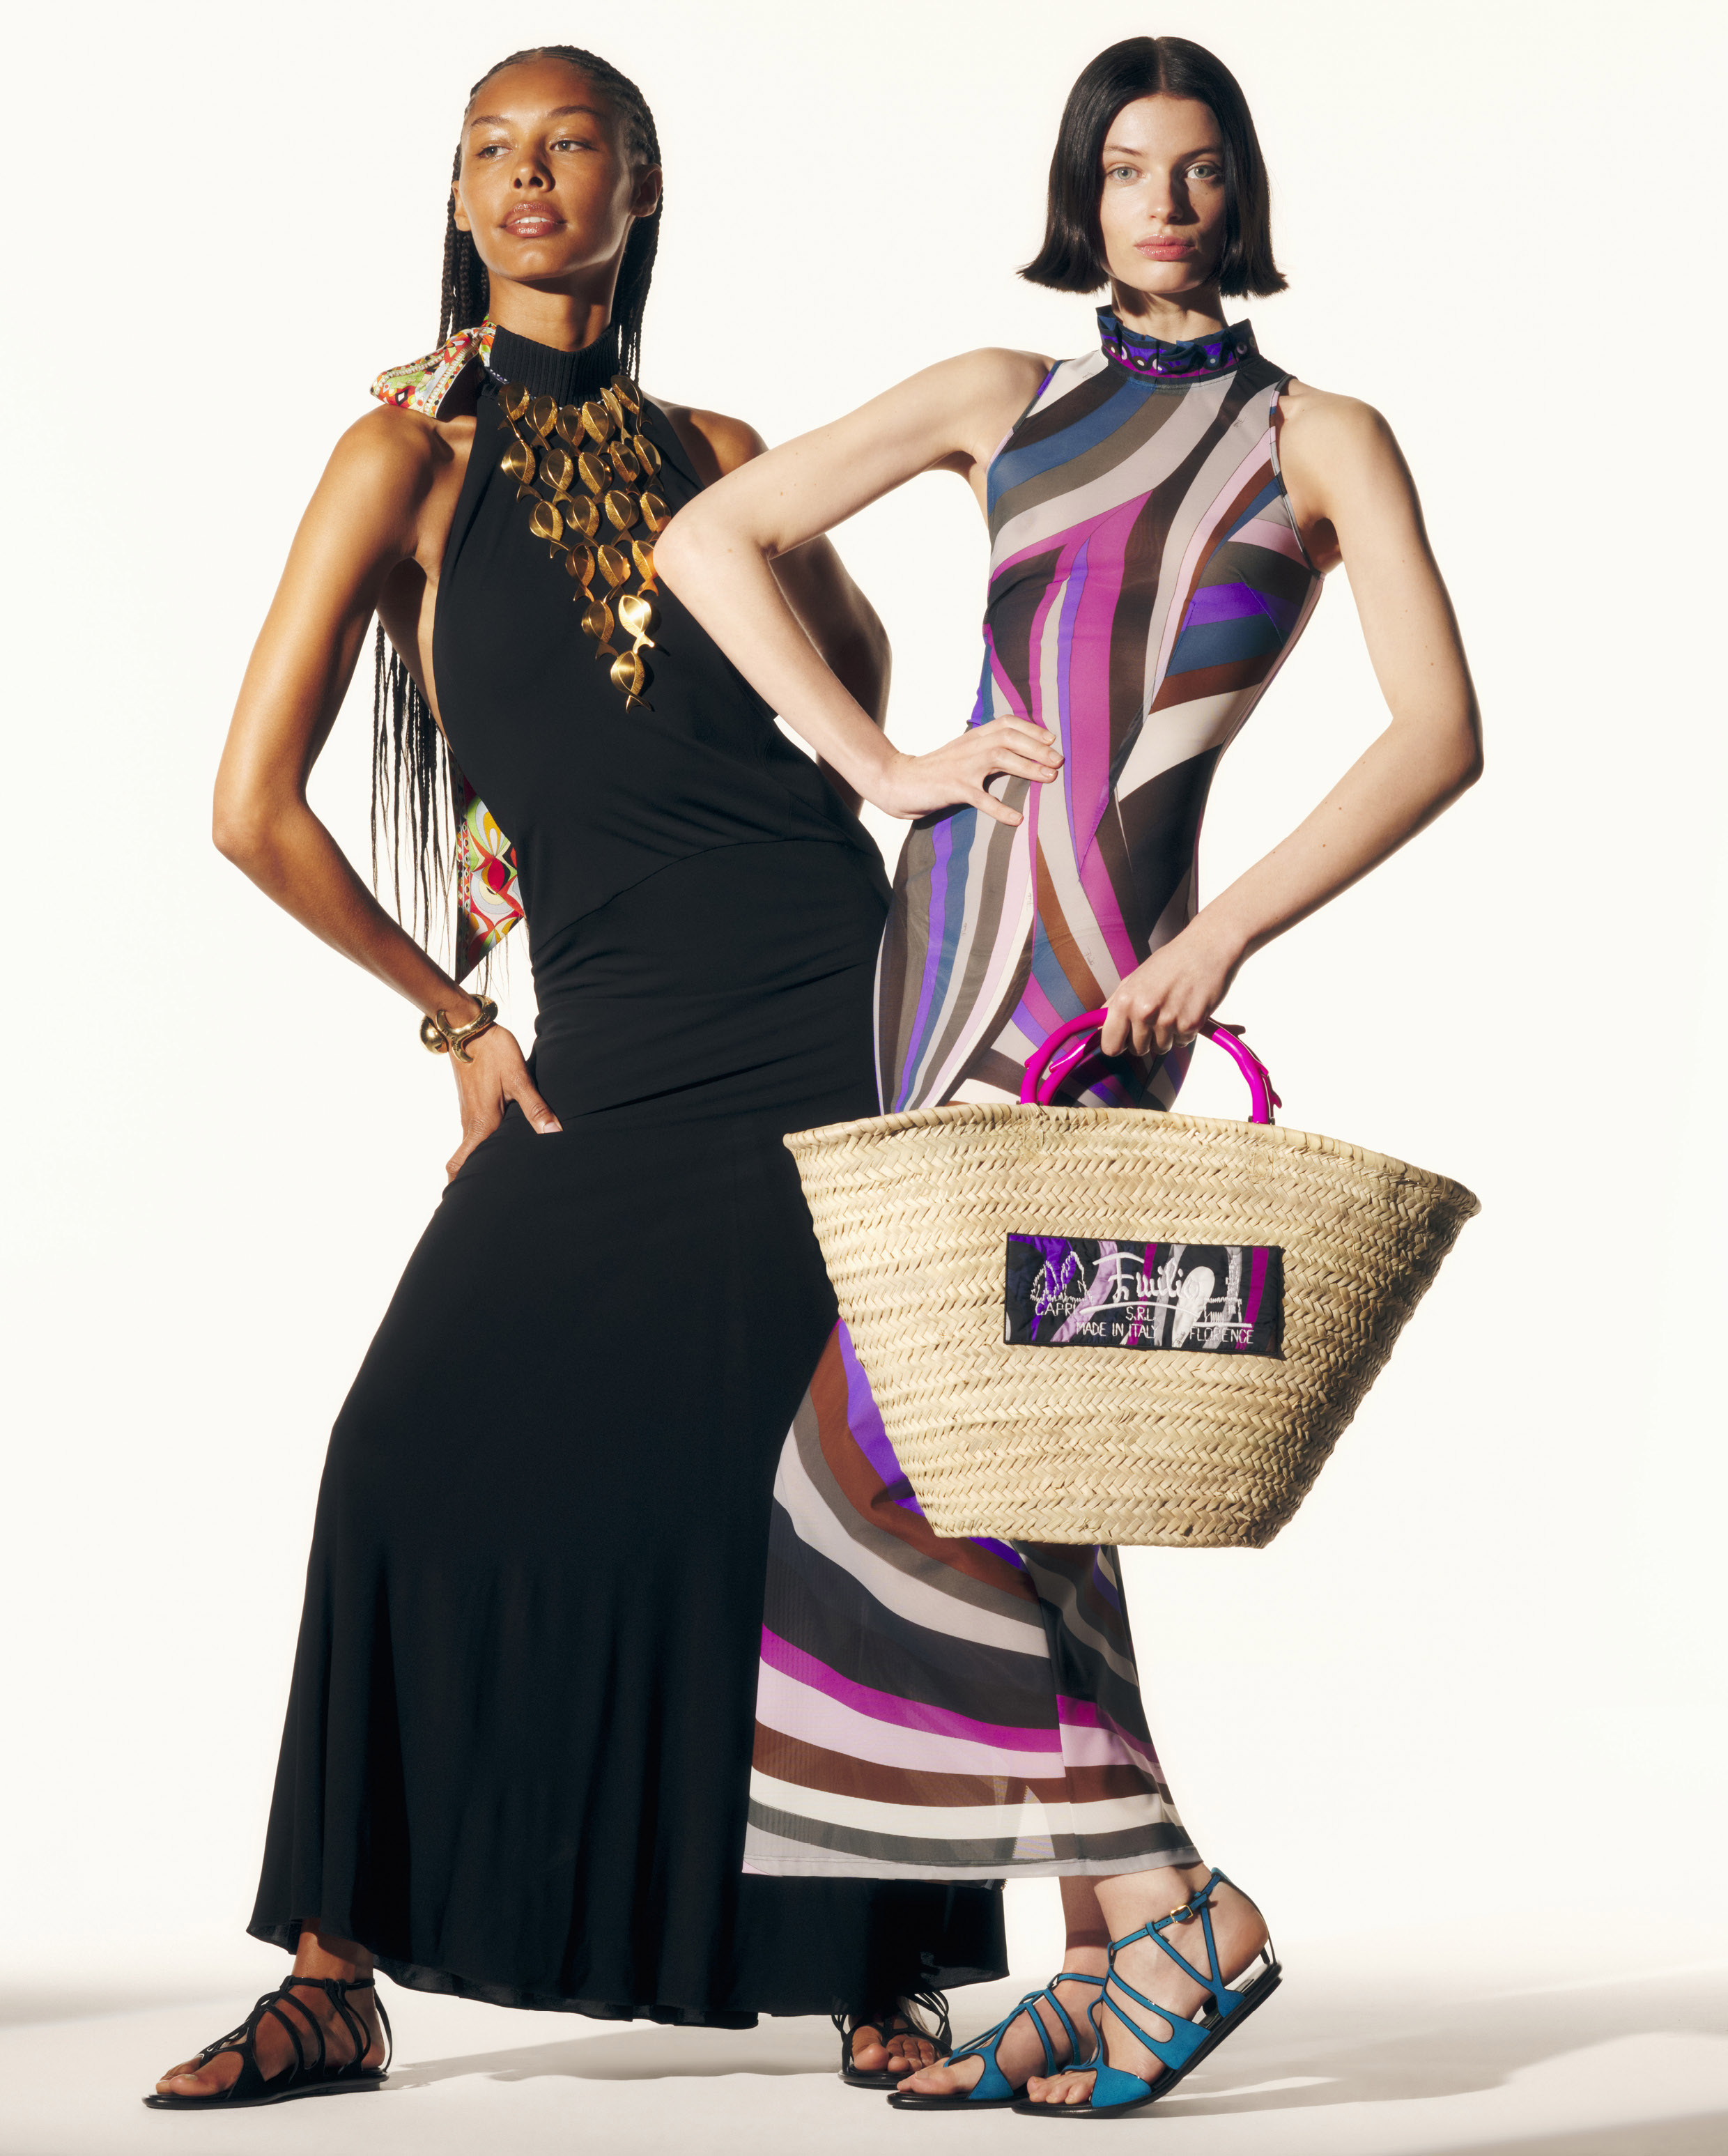 Emilio Pucci, ready-to-wear, accessories - Fashion & Leather Goods